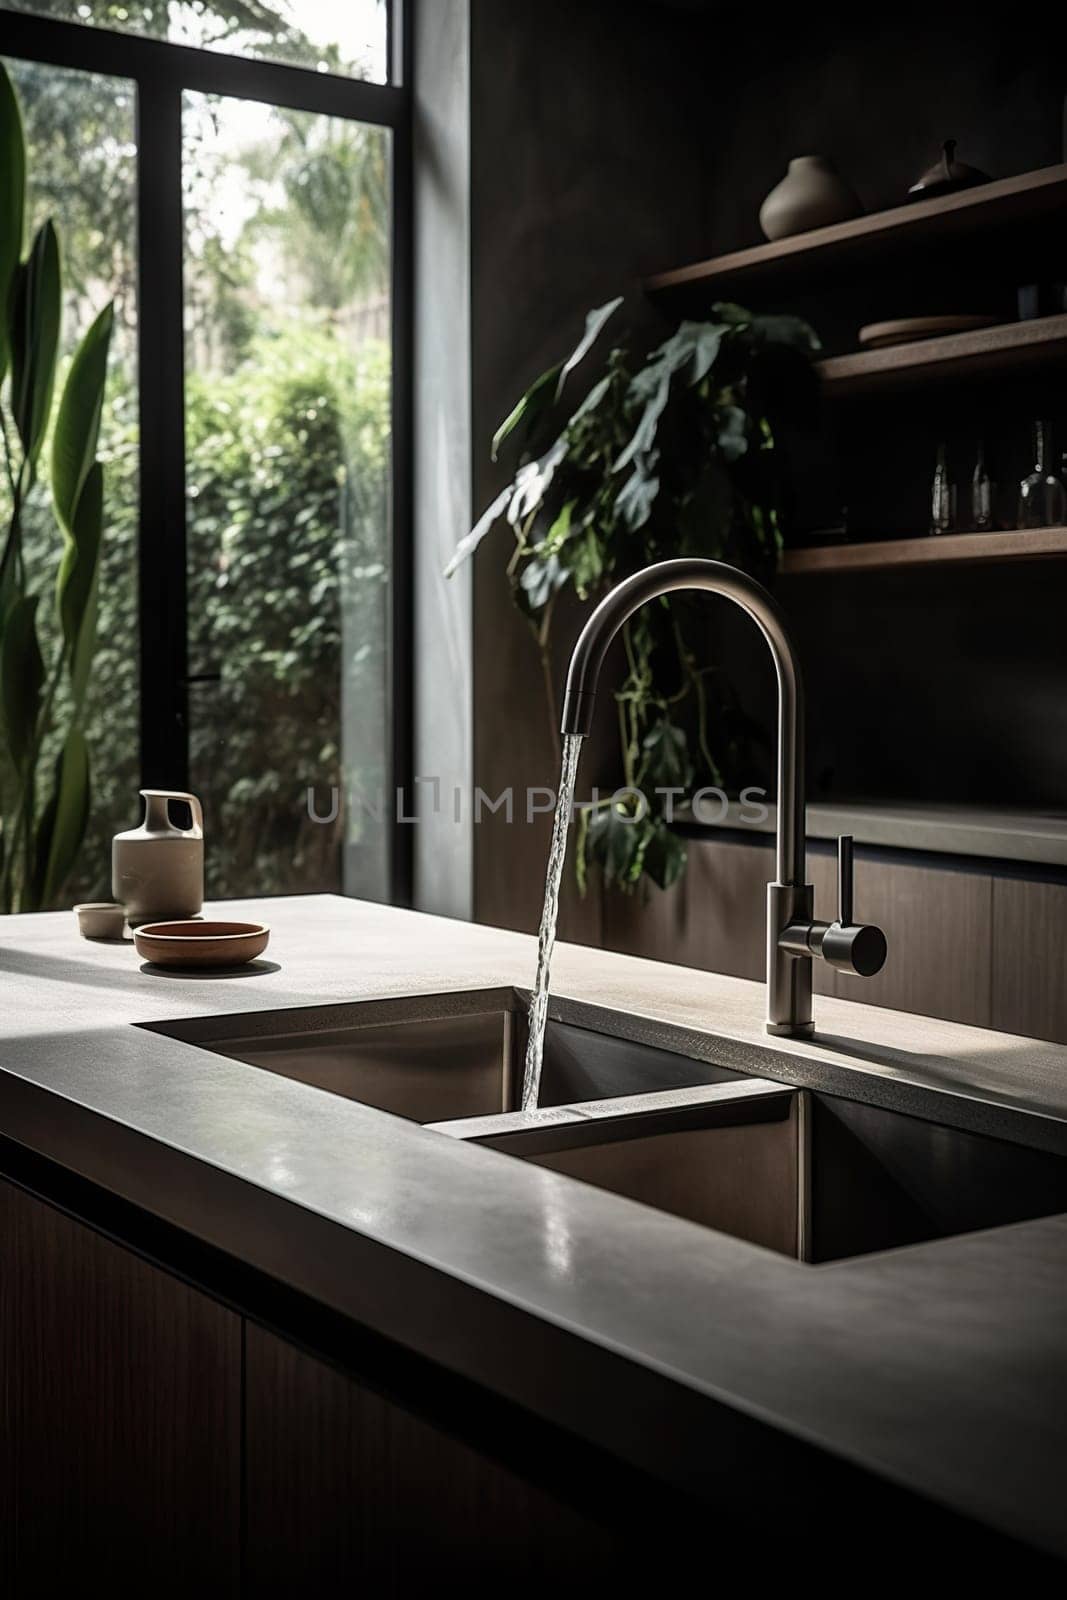 Morning Kitchen With Water Cascades Smoothly From The Tap by tan4ikk1